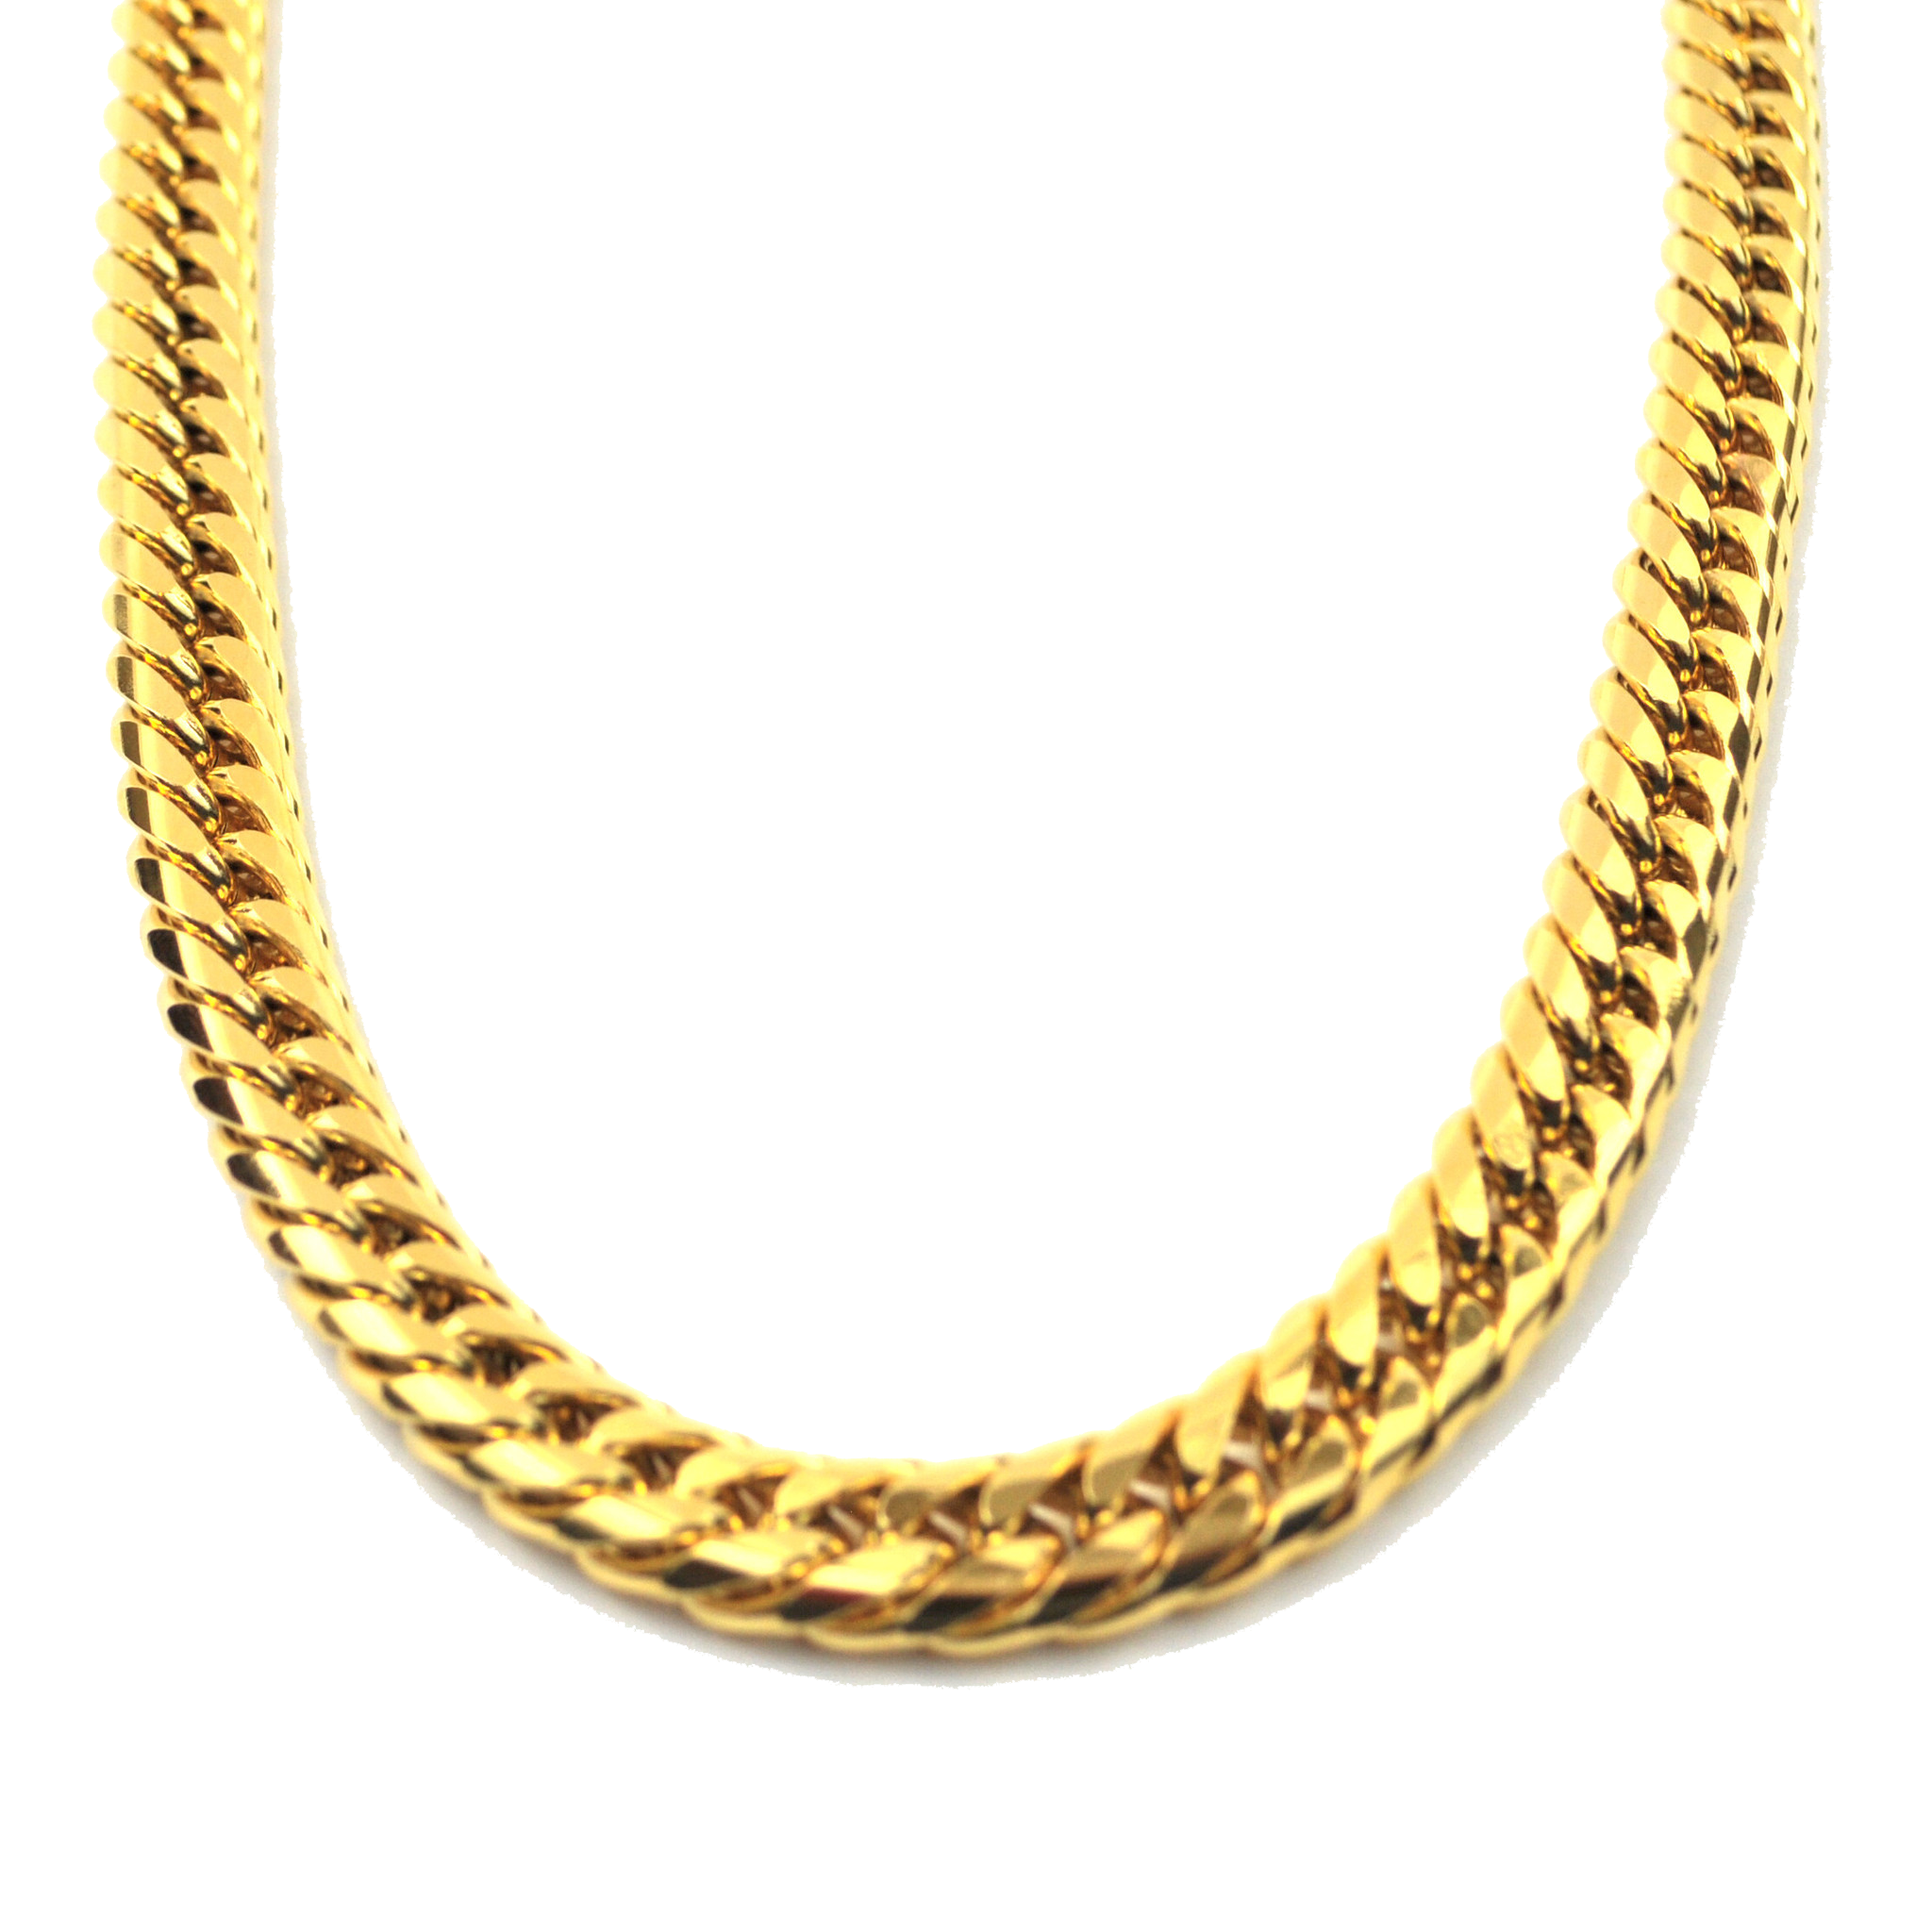 Chain PNG Images, Gold, Silver Chains Free Download - Free Transparent